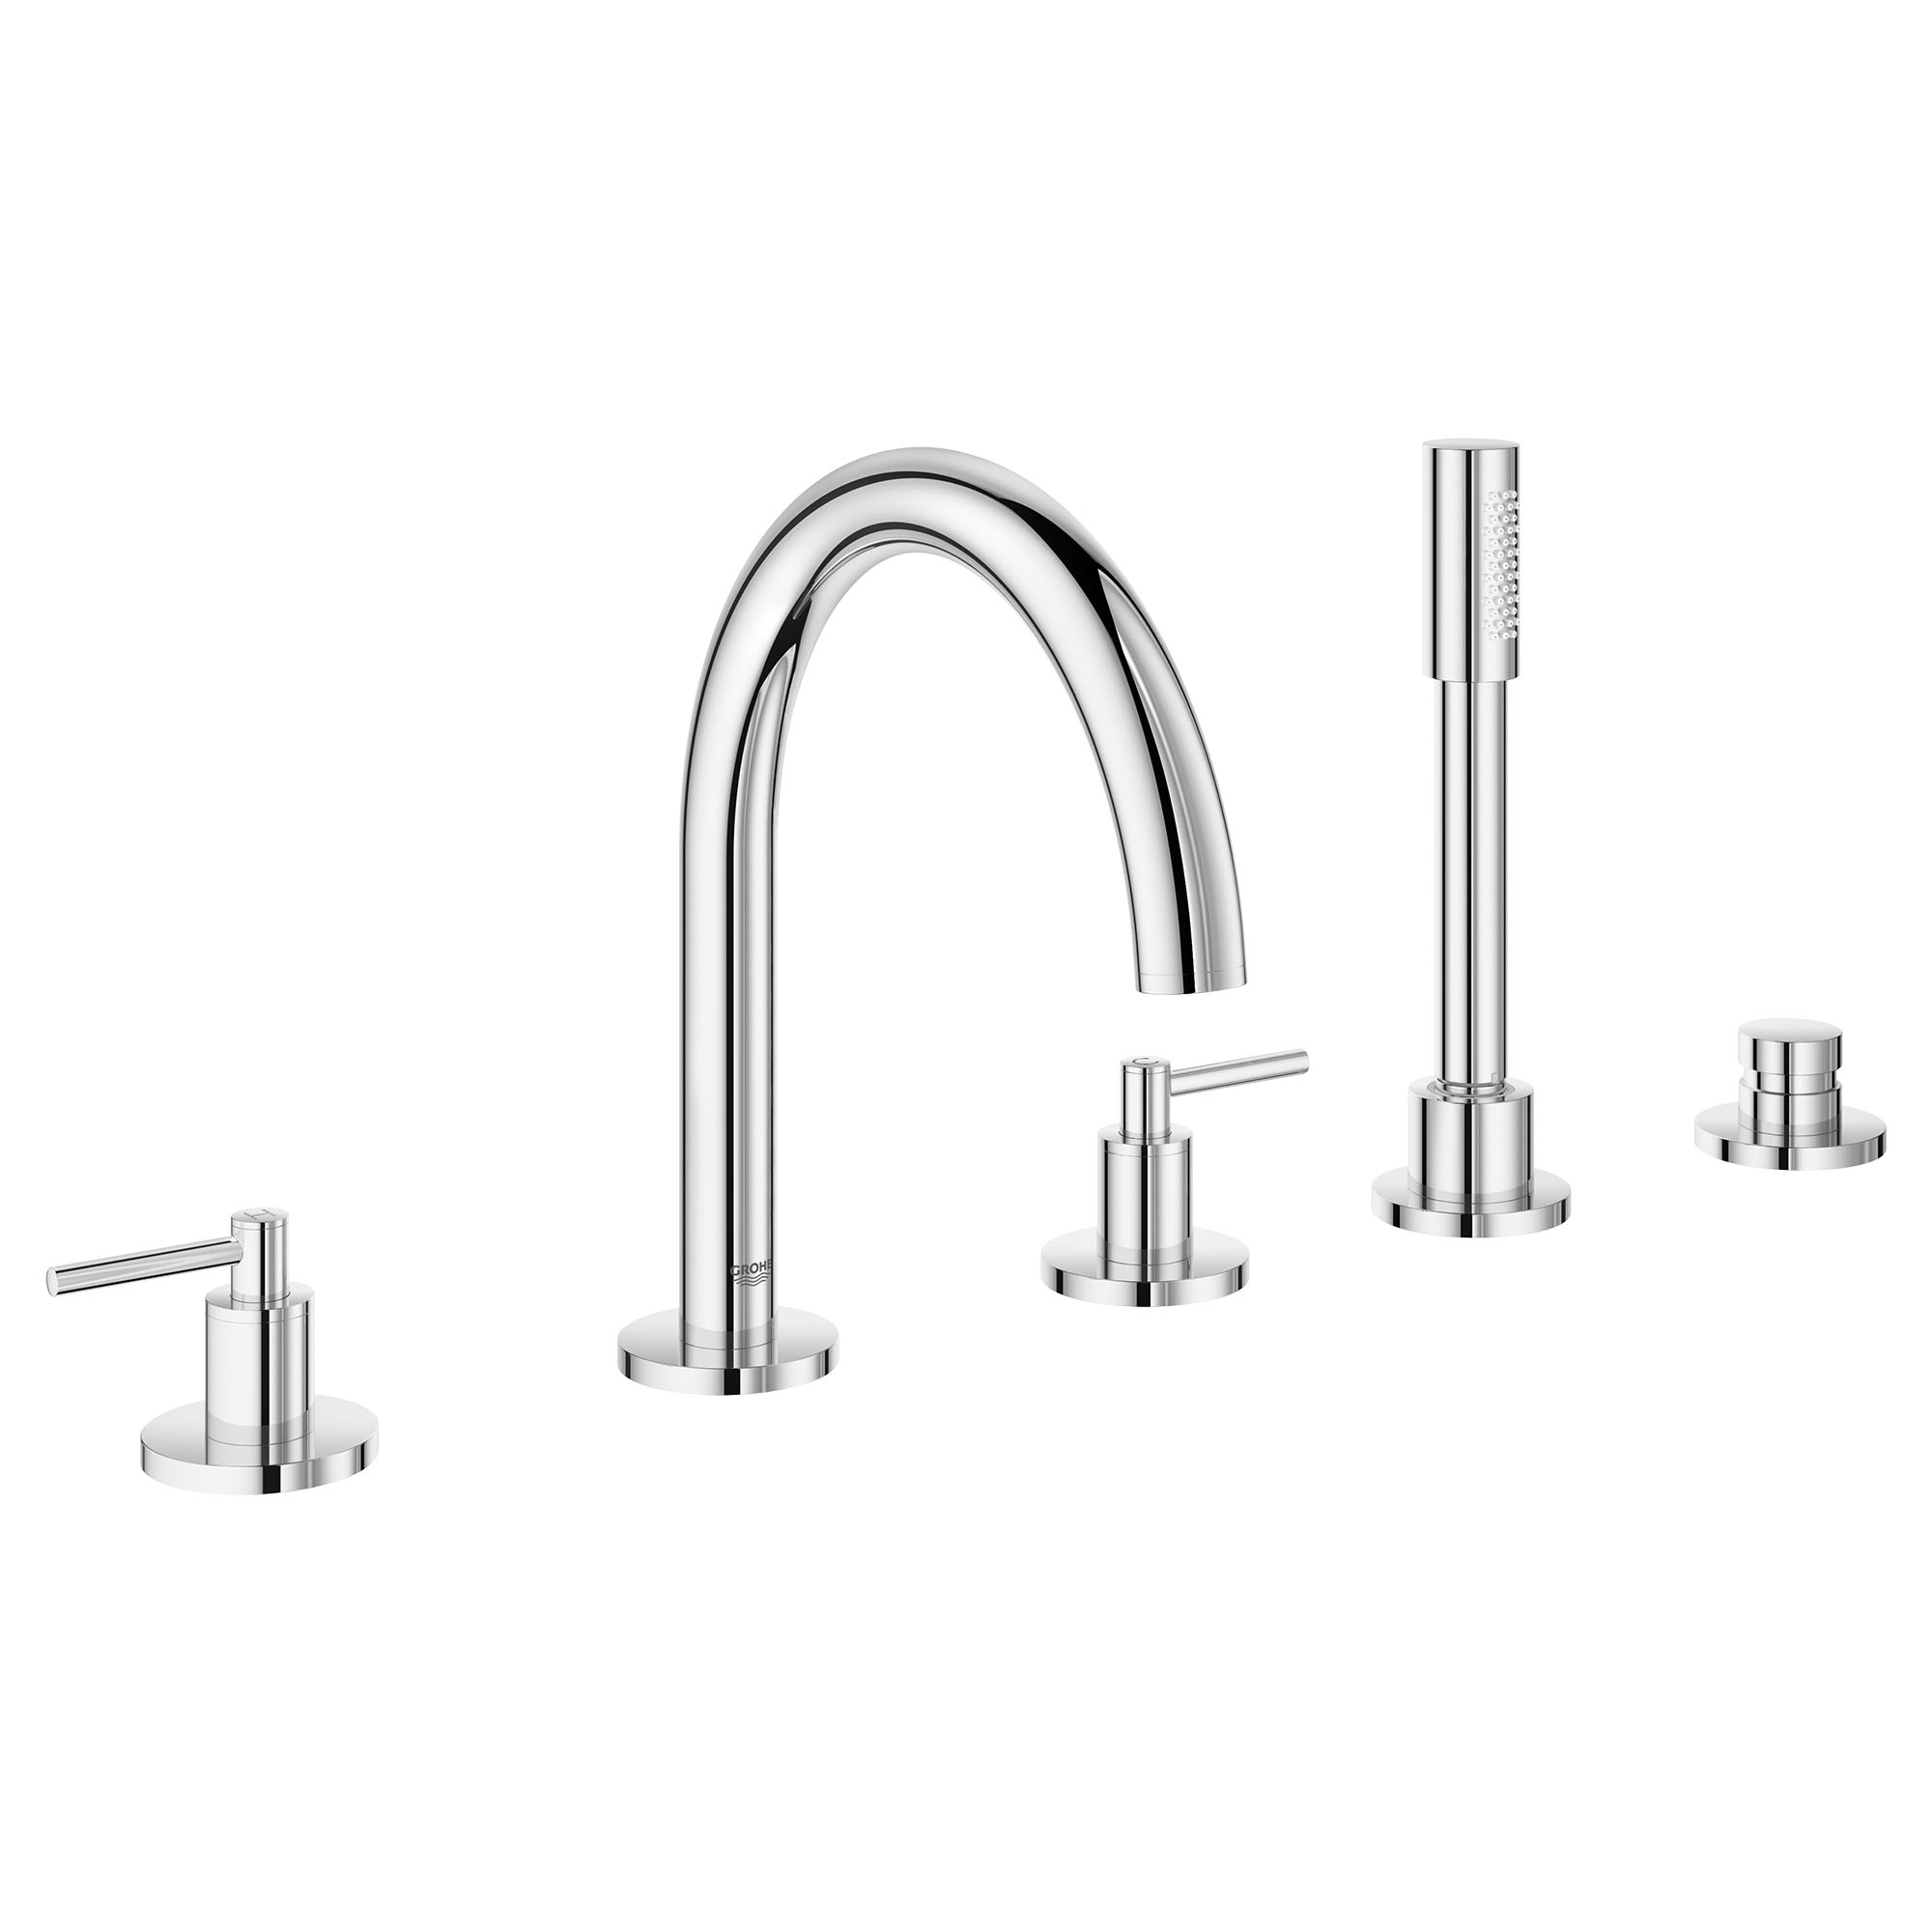 5-Hole 2-Handle Deck Mount Roman Tub Faucet with 6.6 L/min (1.75 gpm) Hand Shower